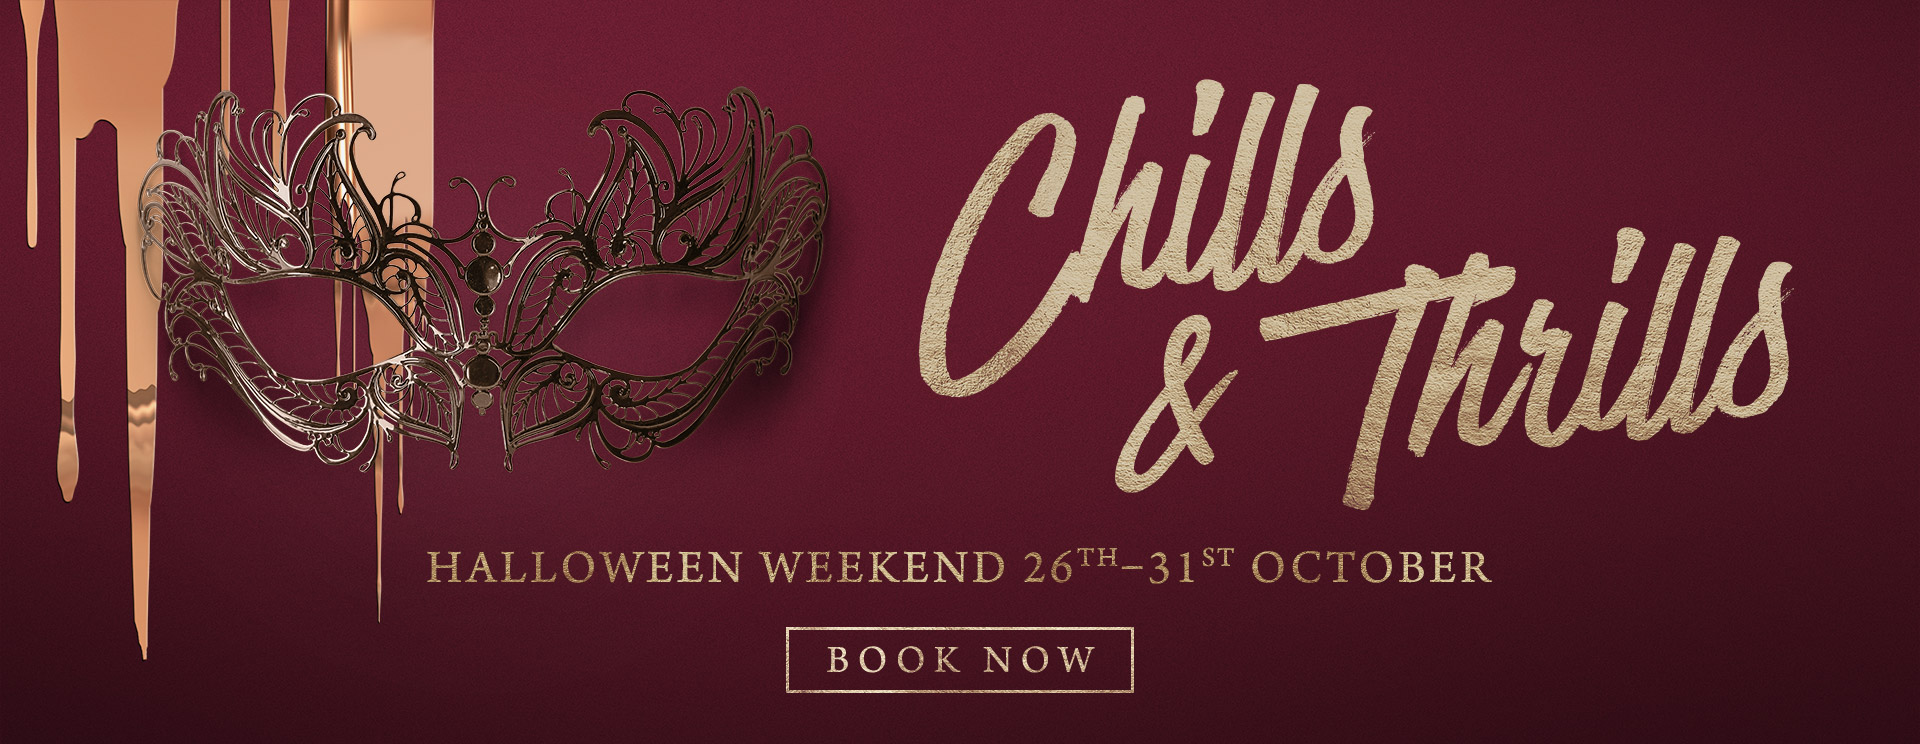 Chills & Thrills this Halloween at The Horse & Groom